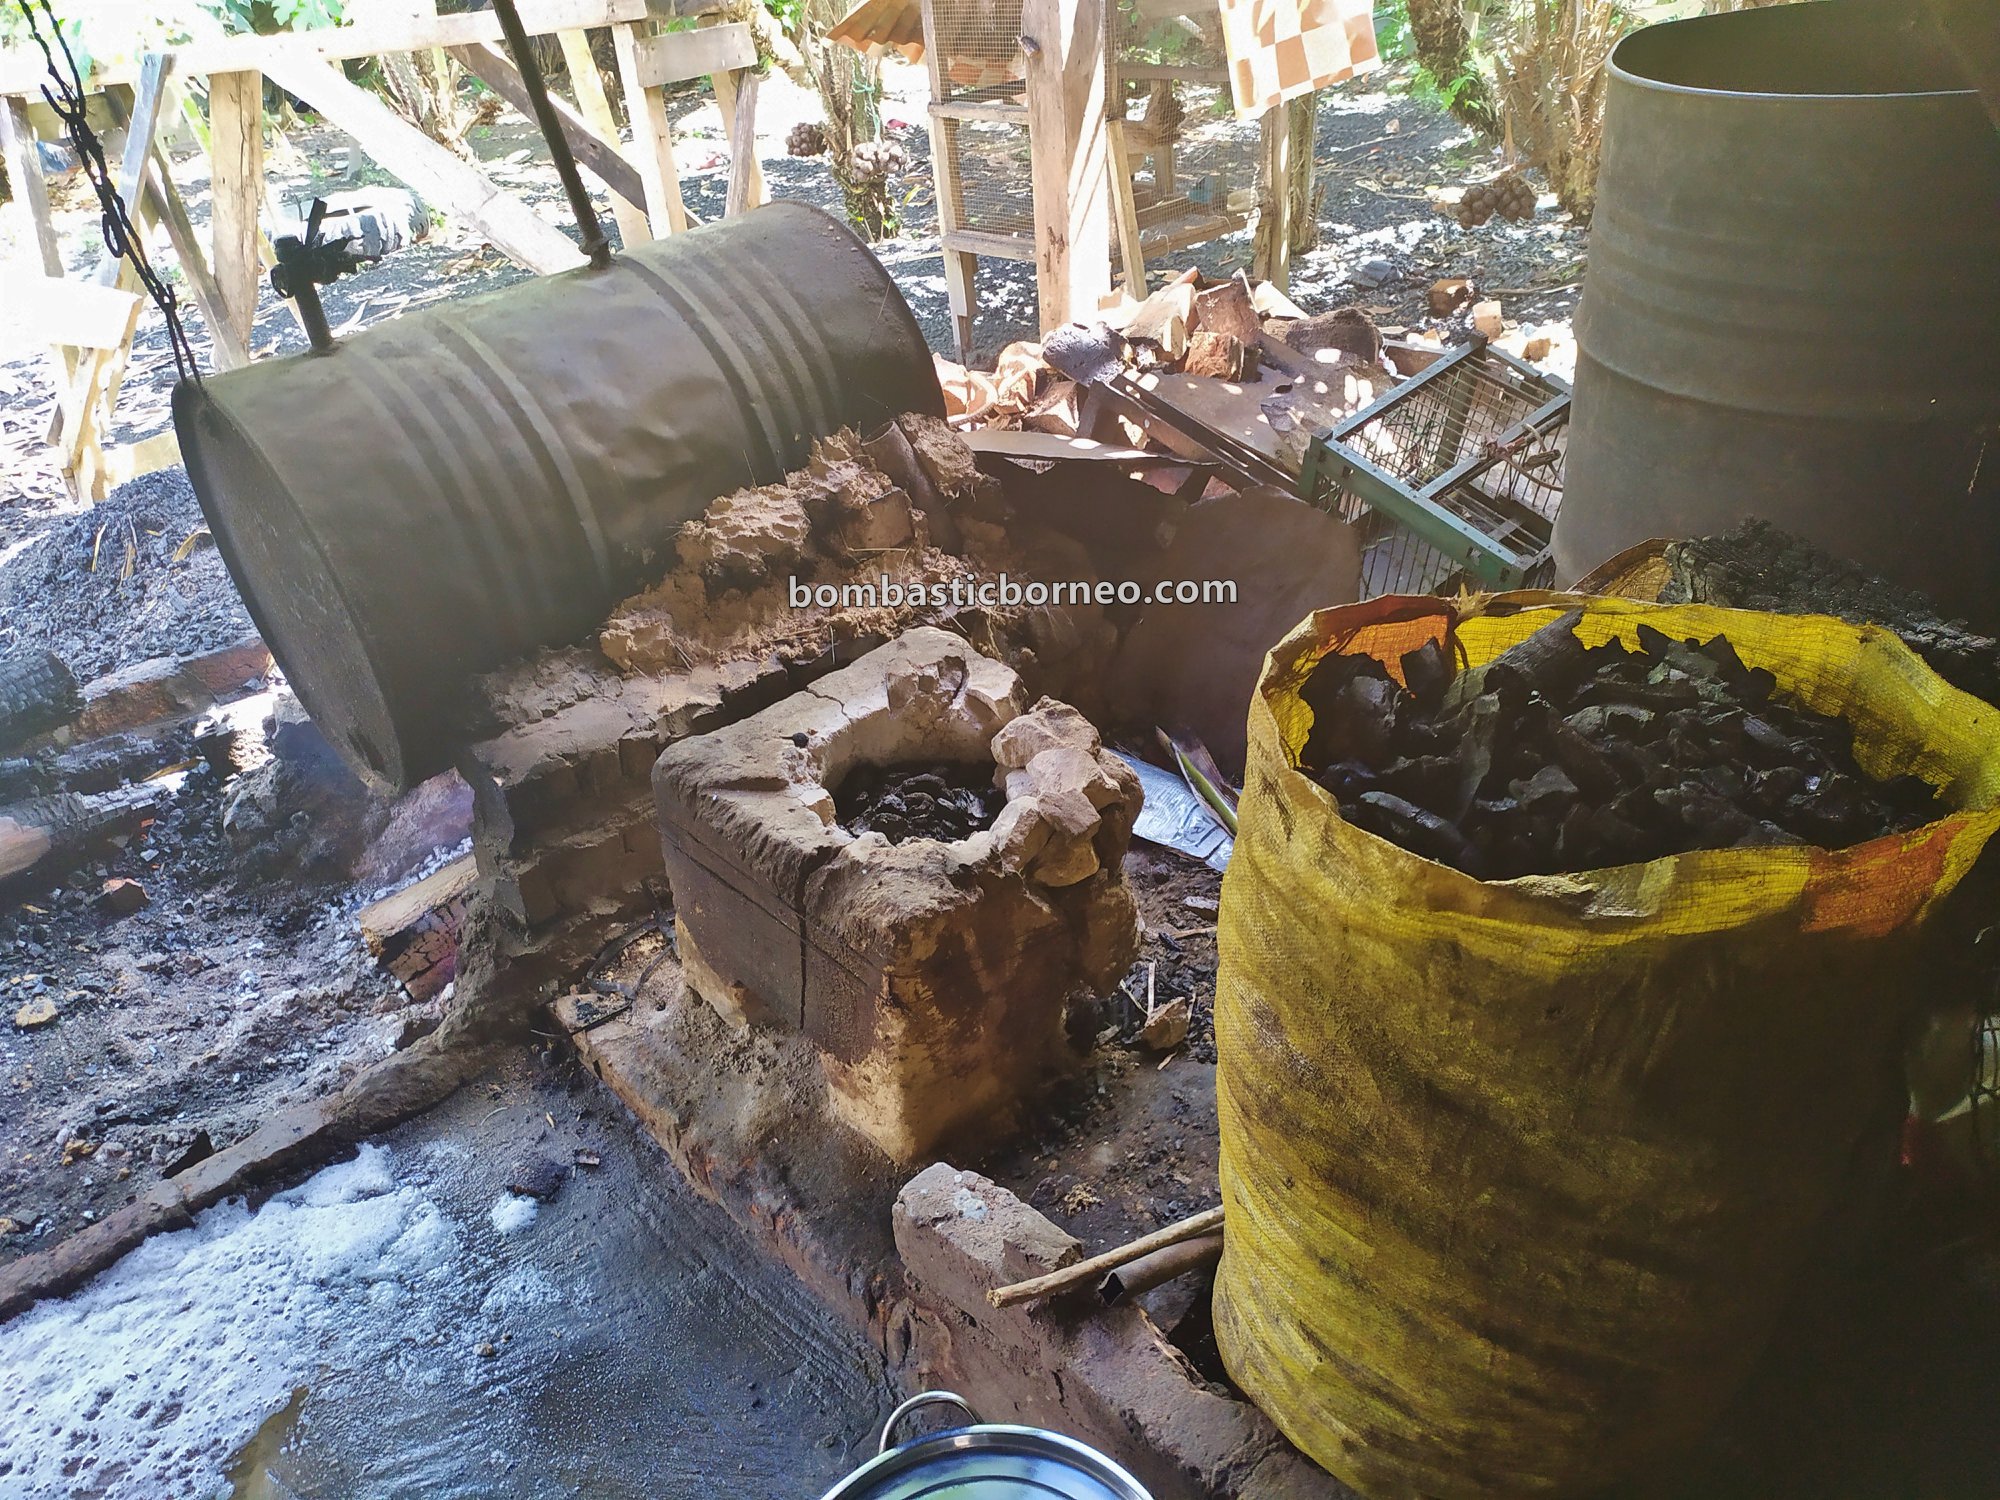 tofu making, traditional, exploration, backpackers, Indonesia, Interior village, Highlands, native, tribal, Tourism, tourist attraction, travel guide, Borneo, 印尼豆腐制作, 婆罗洲北加里曼丹